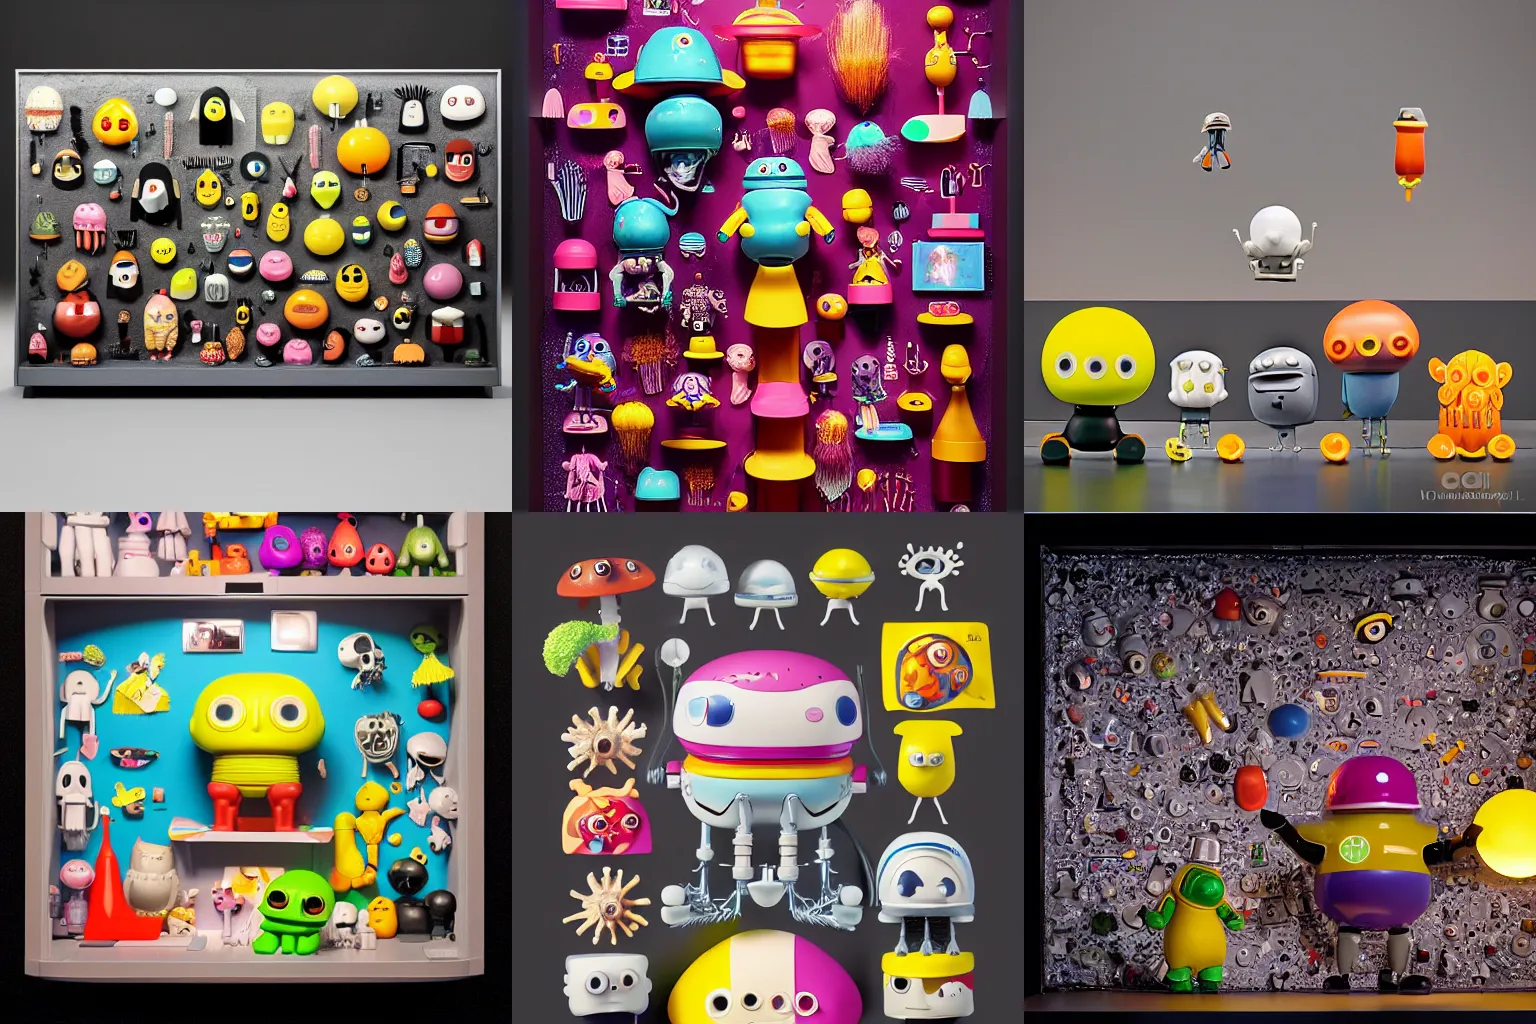 Prompt: Pictoplasma, pictoplasma, pictoplasma, disney, pixar, dreamworks, animated, Simple bionic exploded drawing, crossection funko pop toyfigure fungus sculpture, jellybeans, organs, kidney, by david lachapelle, by angus mckie, by rhads, in a dark empty black studio hollow, c4d, at night, rimlight, c4d, by jonathan ivy, by alex grey, Haeckel